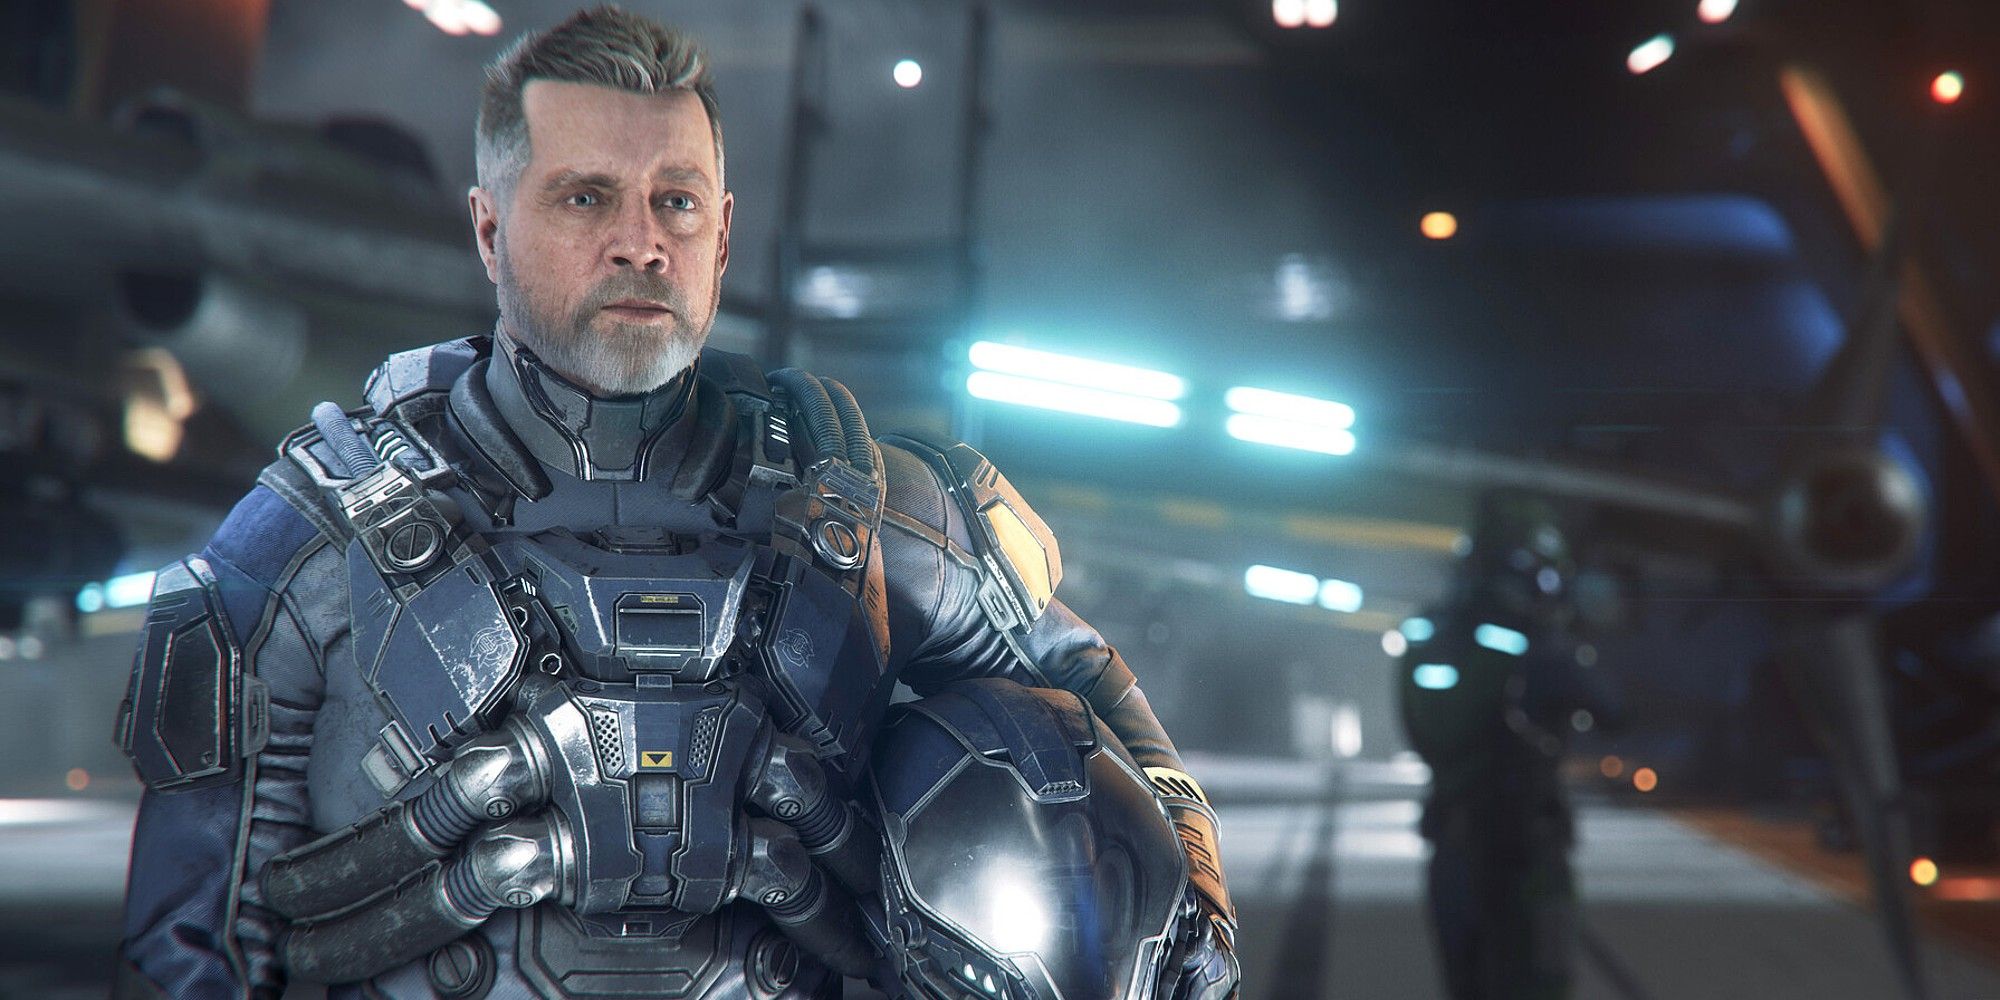 Crowdfunded Star Citizen raises over $148 million, but release date has  been postponed indefinitely